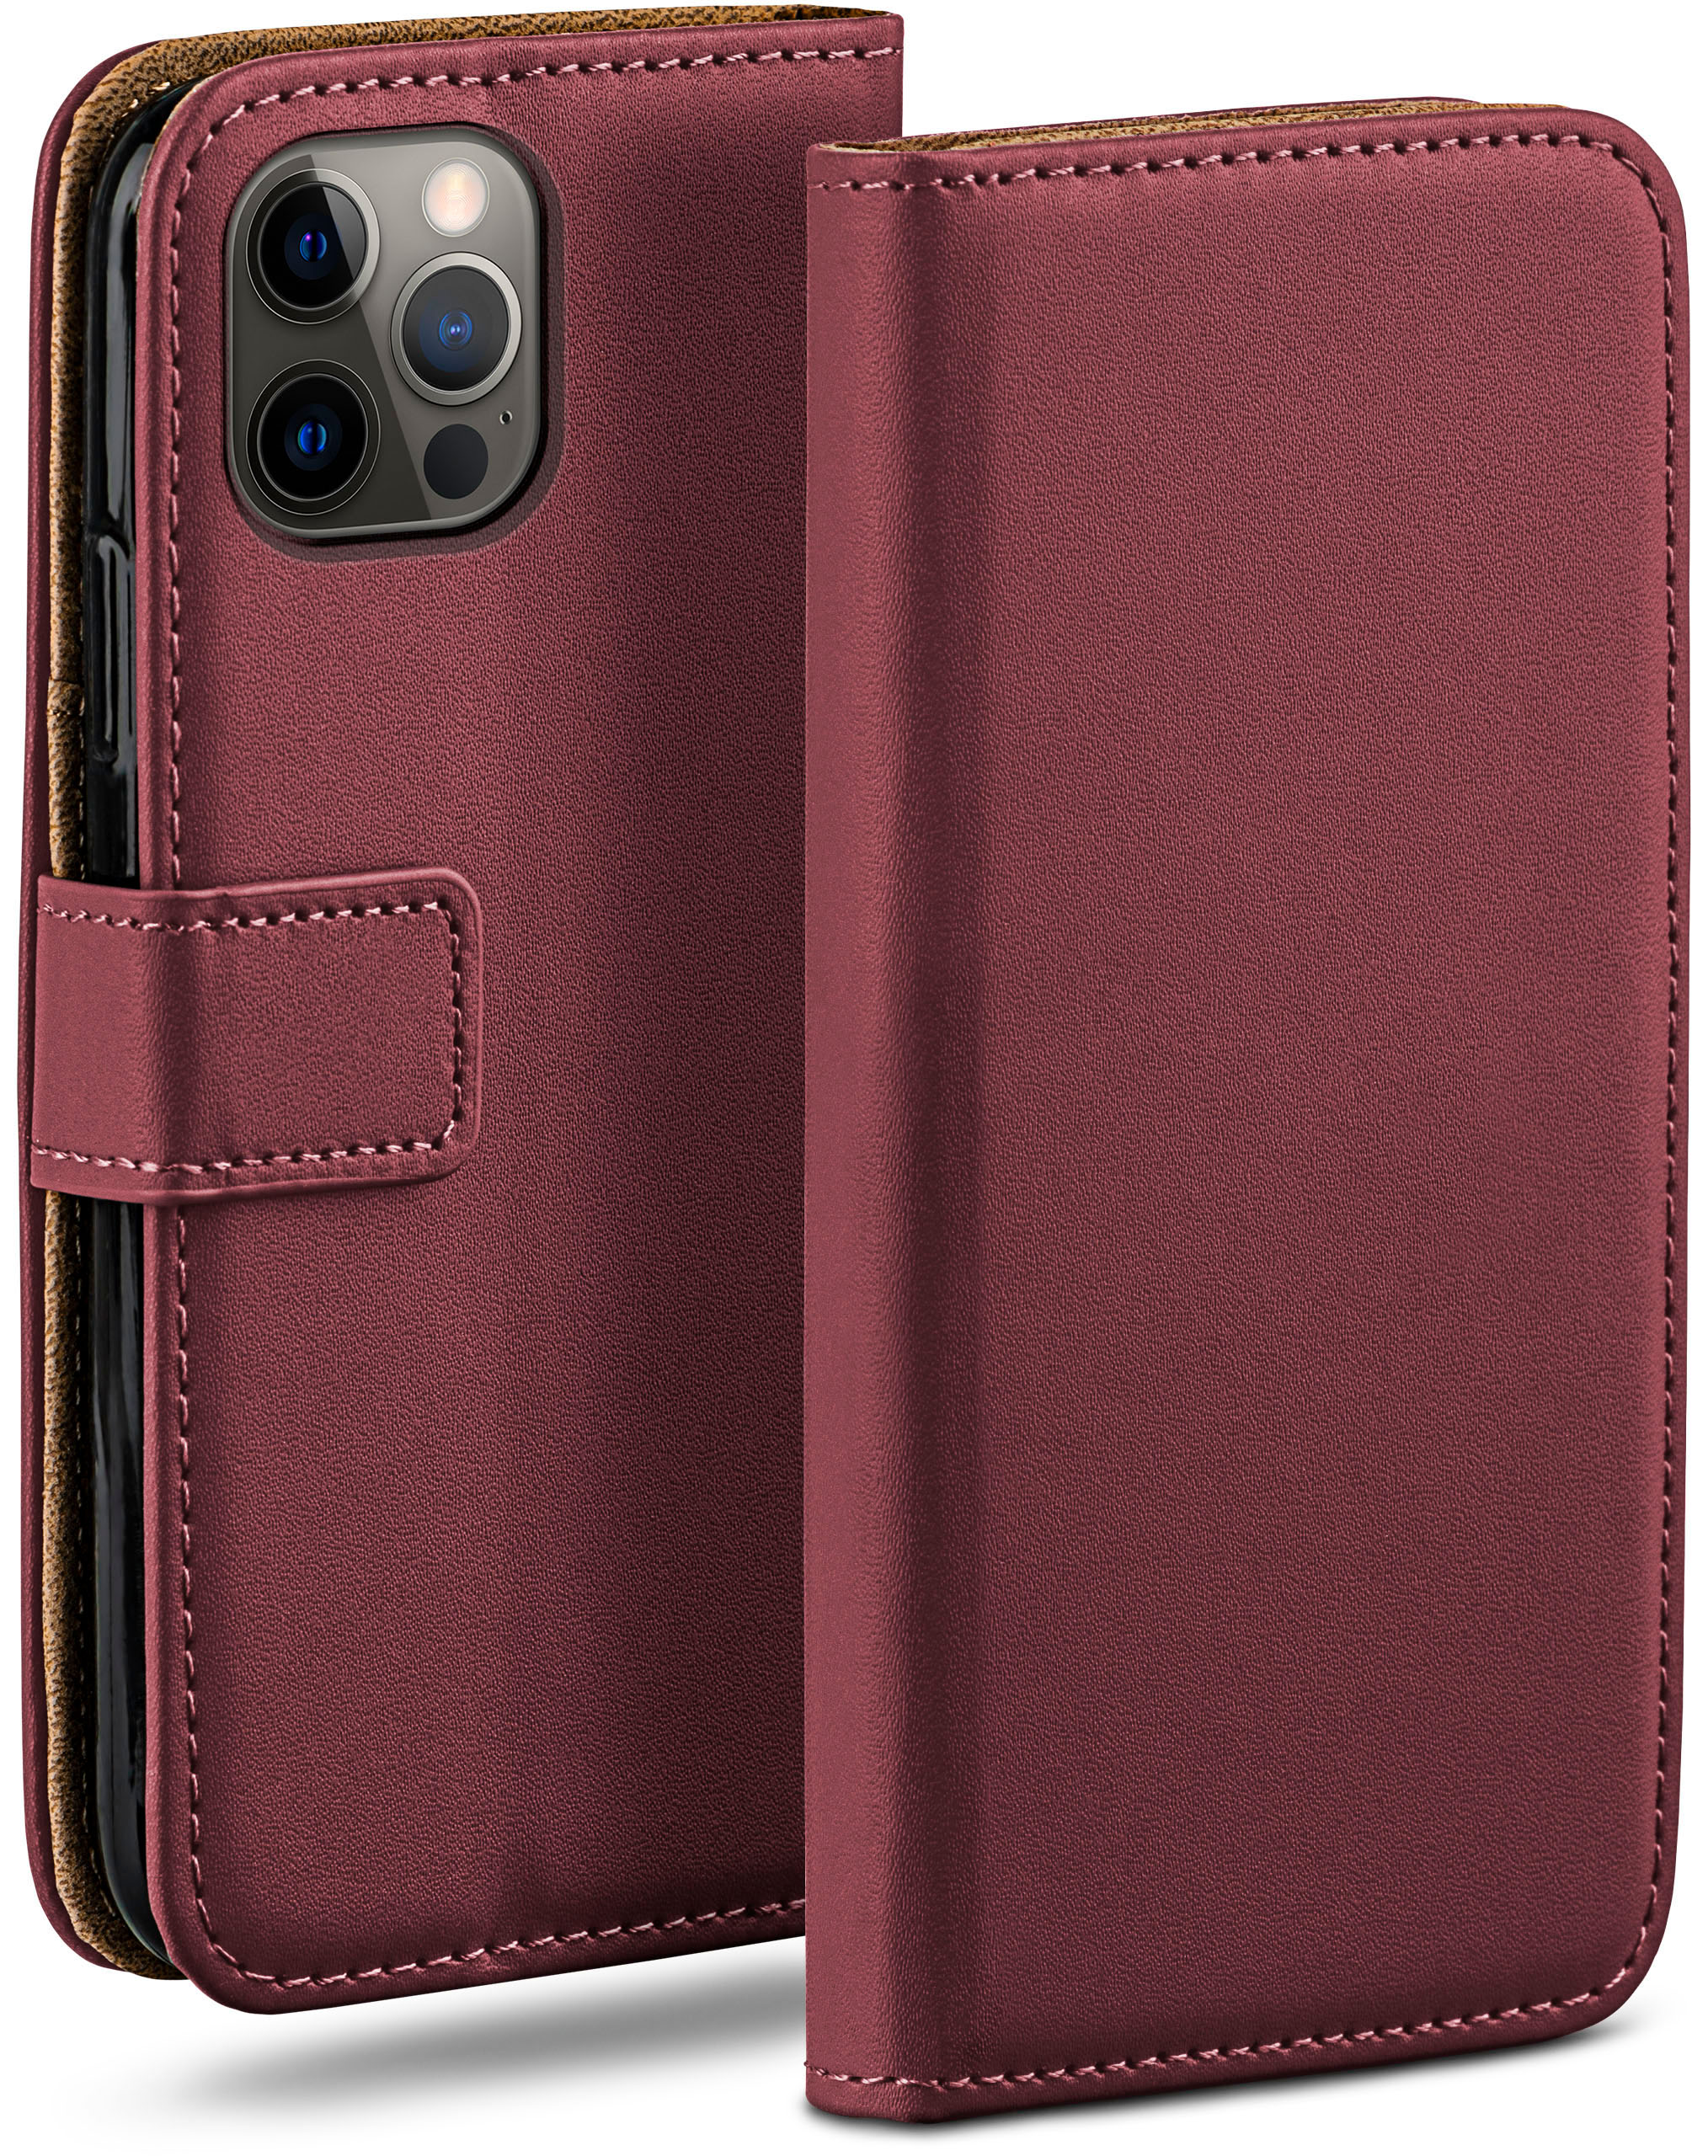 Apple, MOEX Max, iPhone Bookcover, Maroon-Red Book 12 Case, Pro